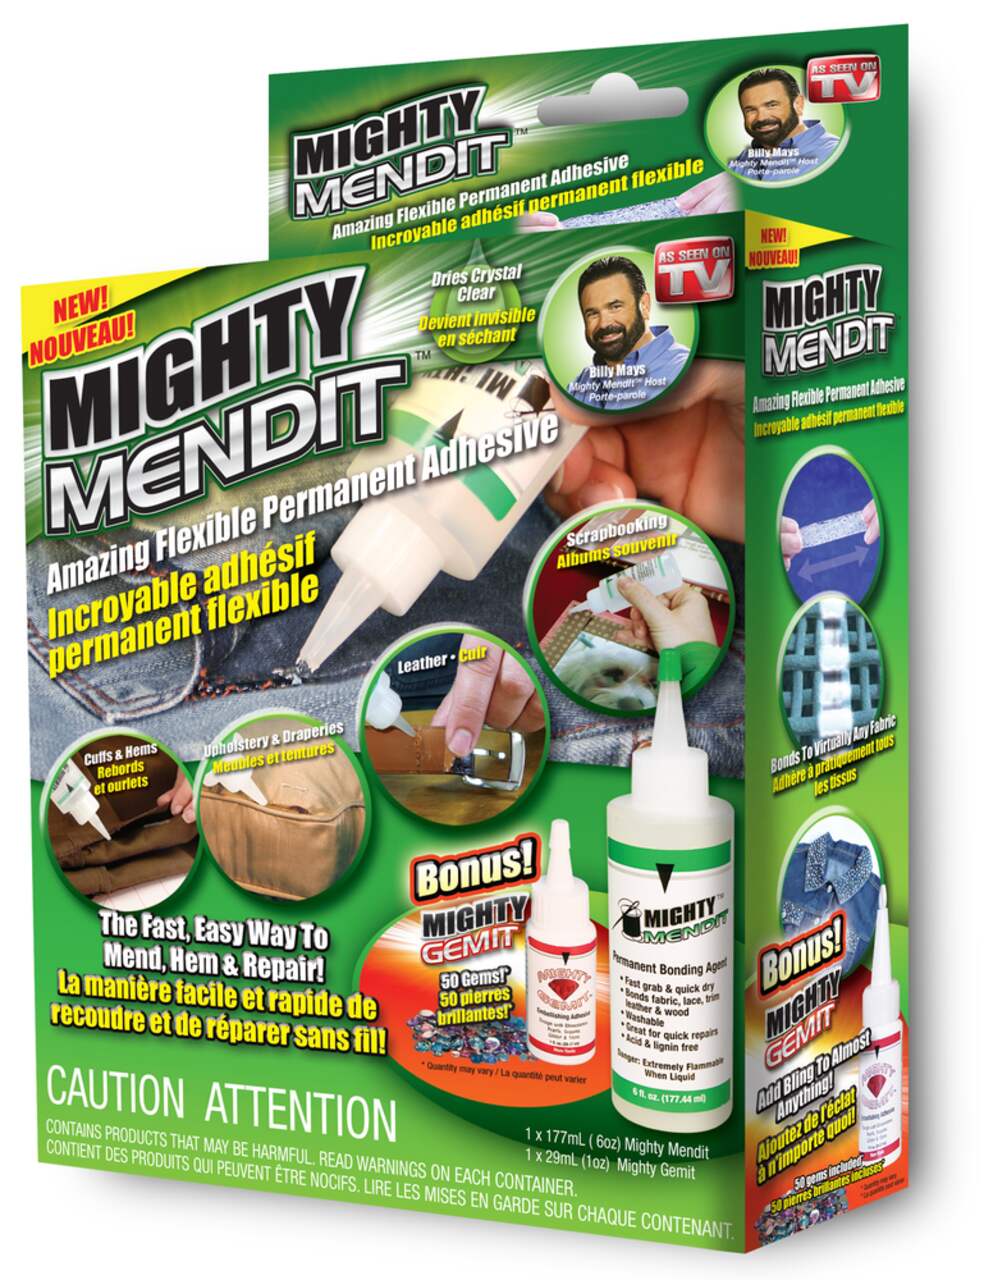 Mighty Mend-it: Does it Work?